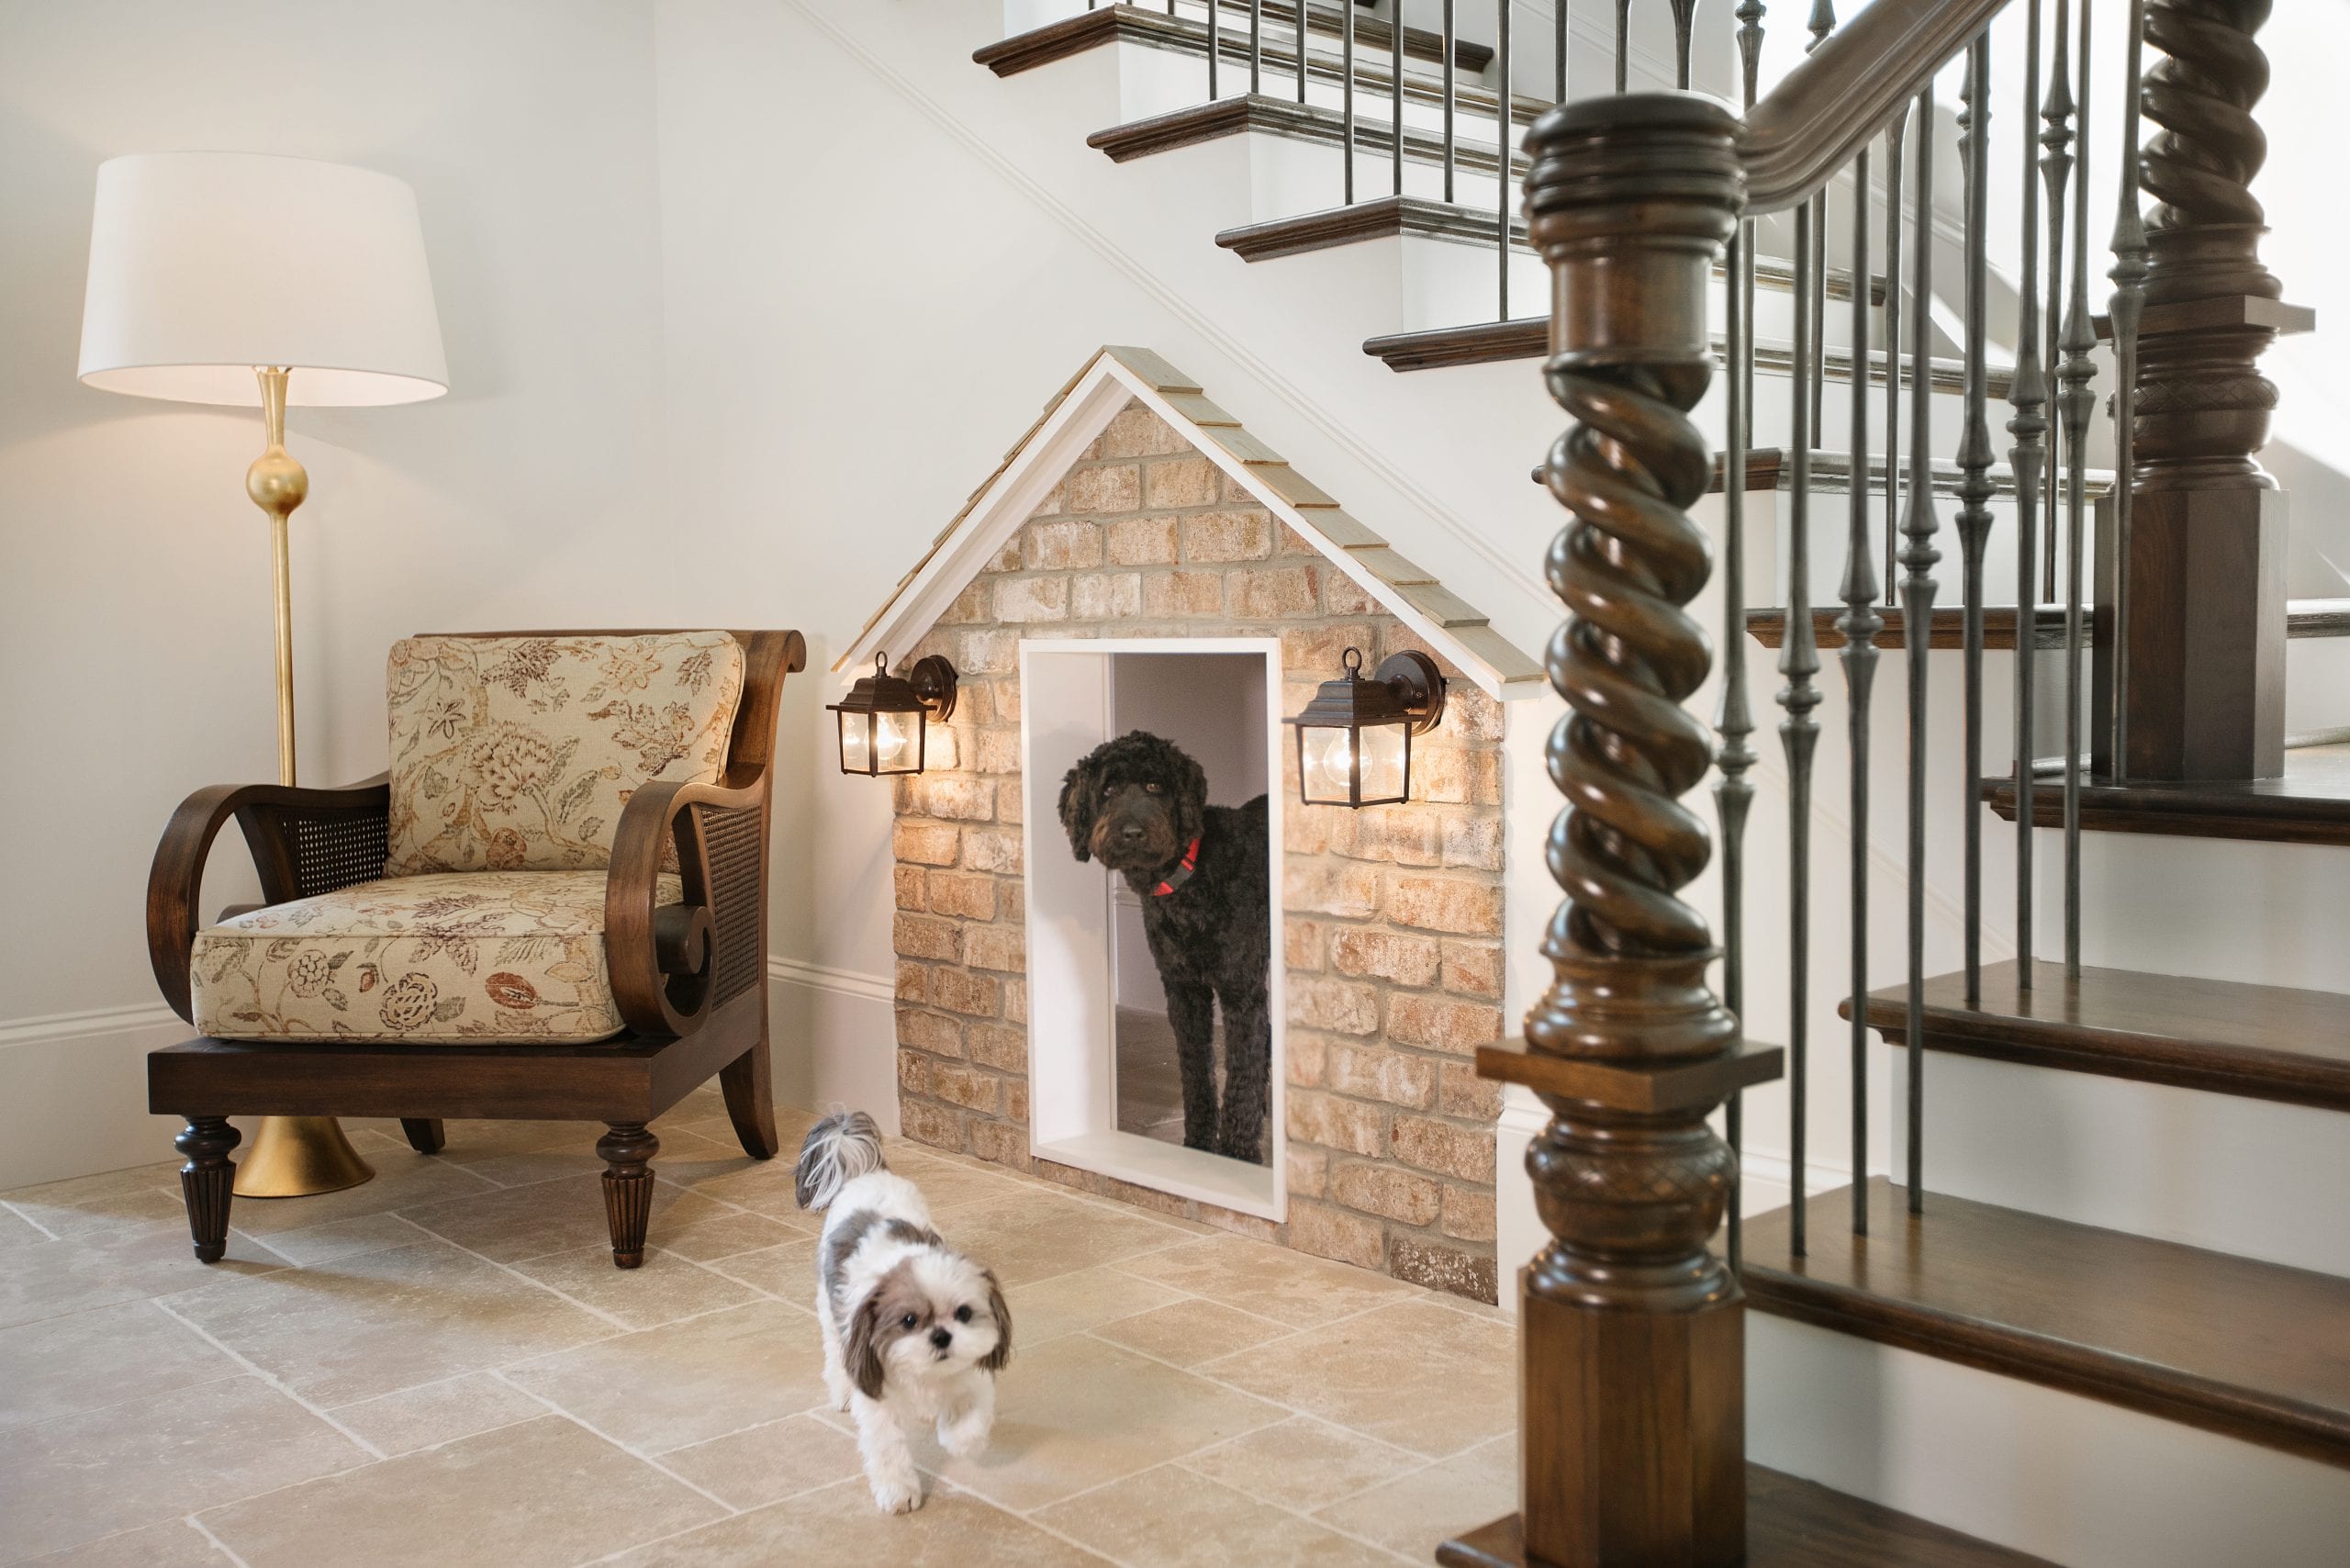 Take the Stairs: It’s a Dog’s World